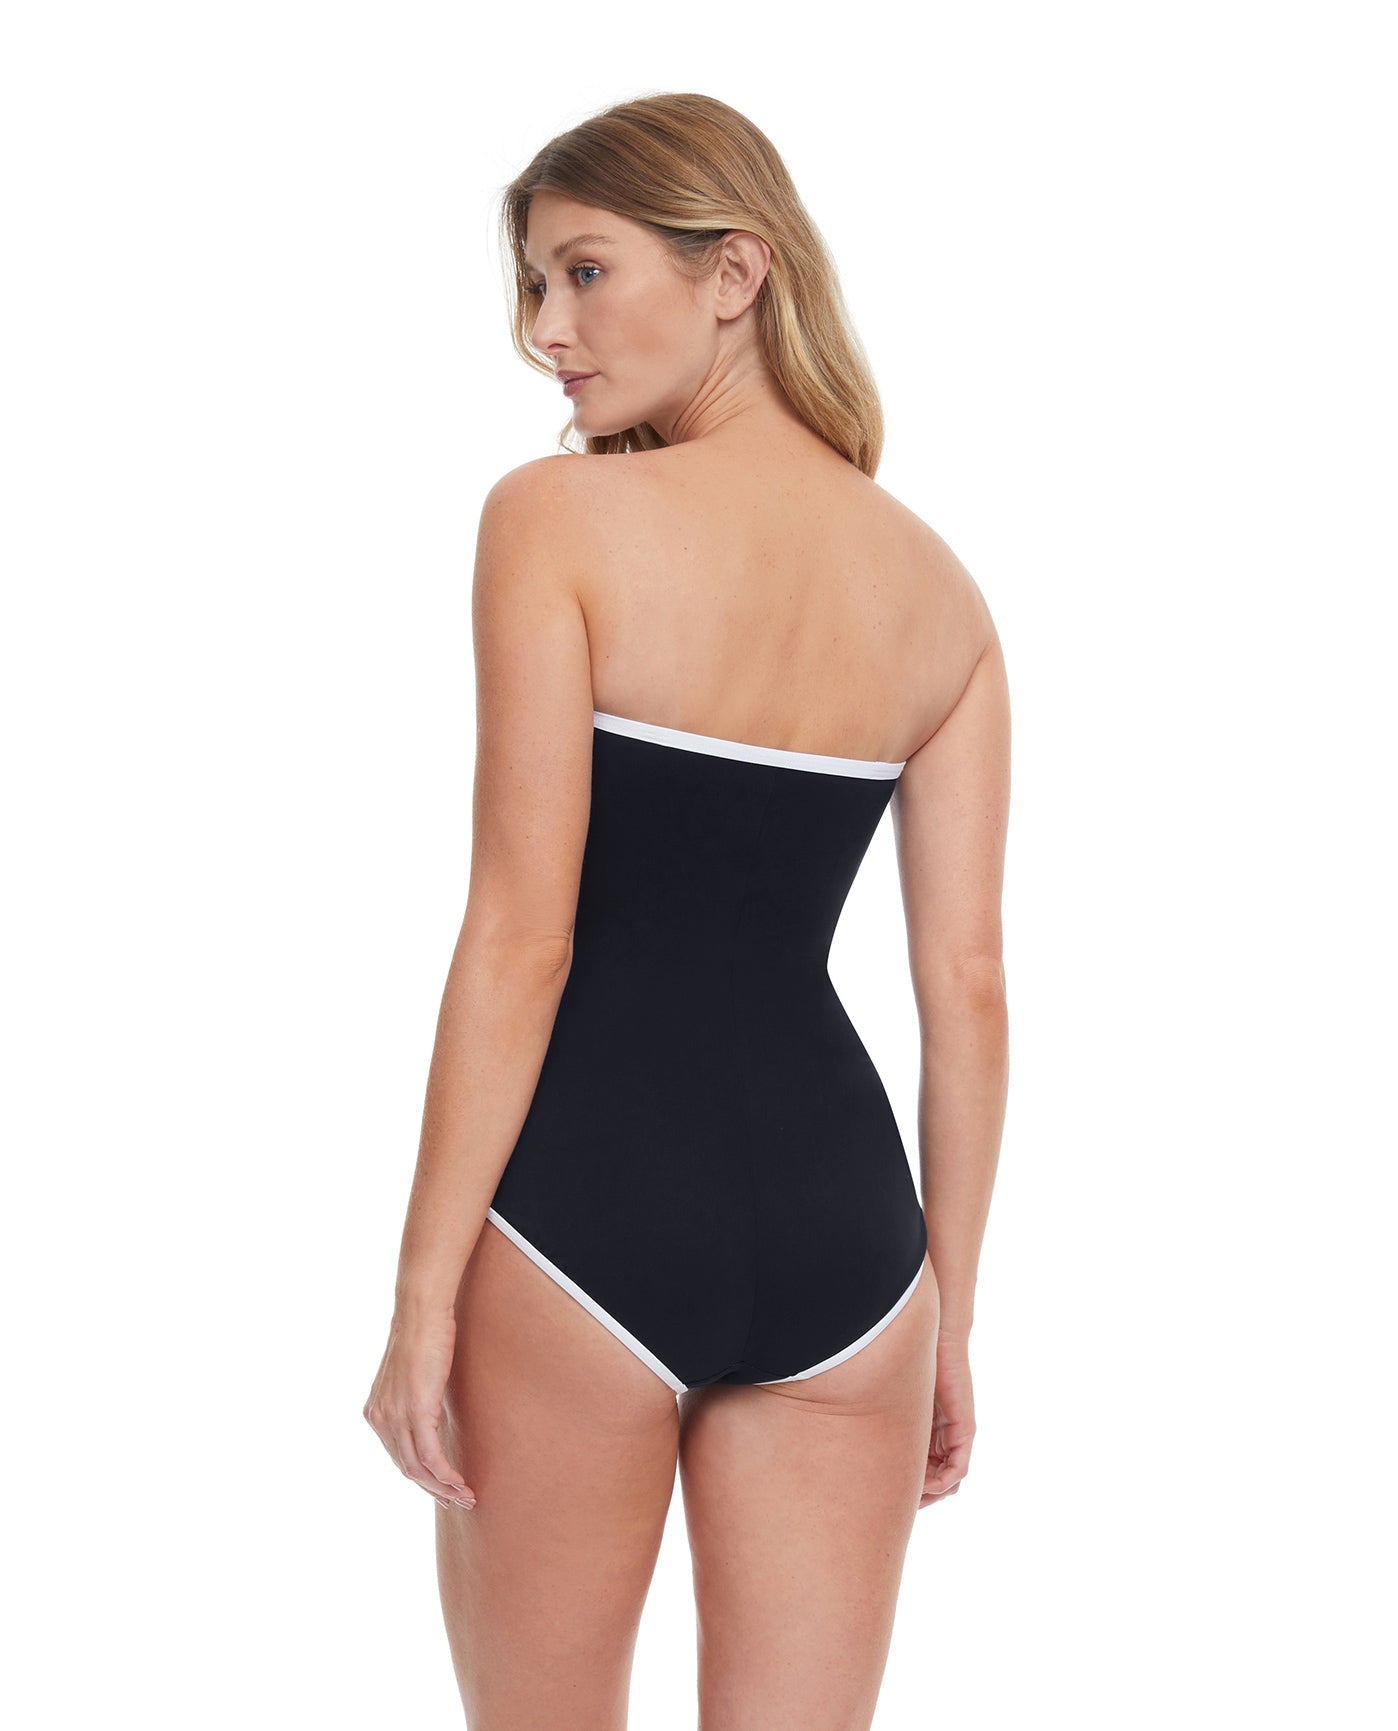 Back View Of Gottex Essentials Sail To Sunset Bandeau Strapless One Piece Swimsuit | Gottex Sail To Sunset Black And White